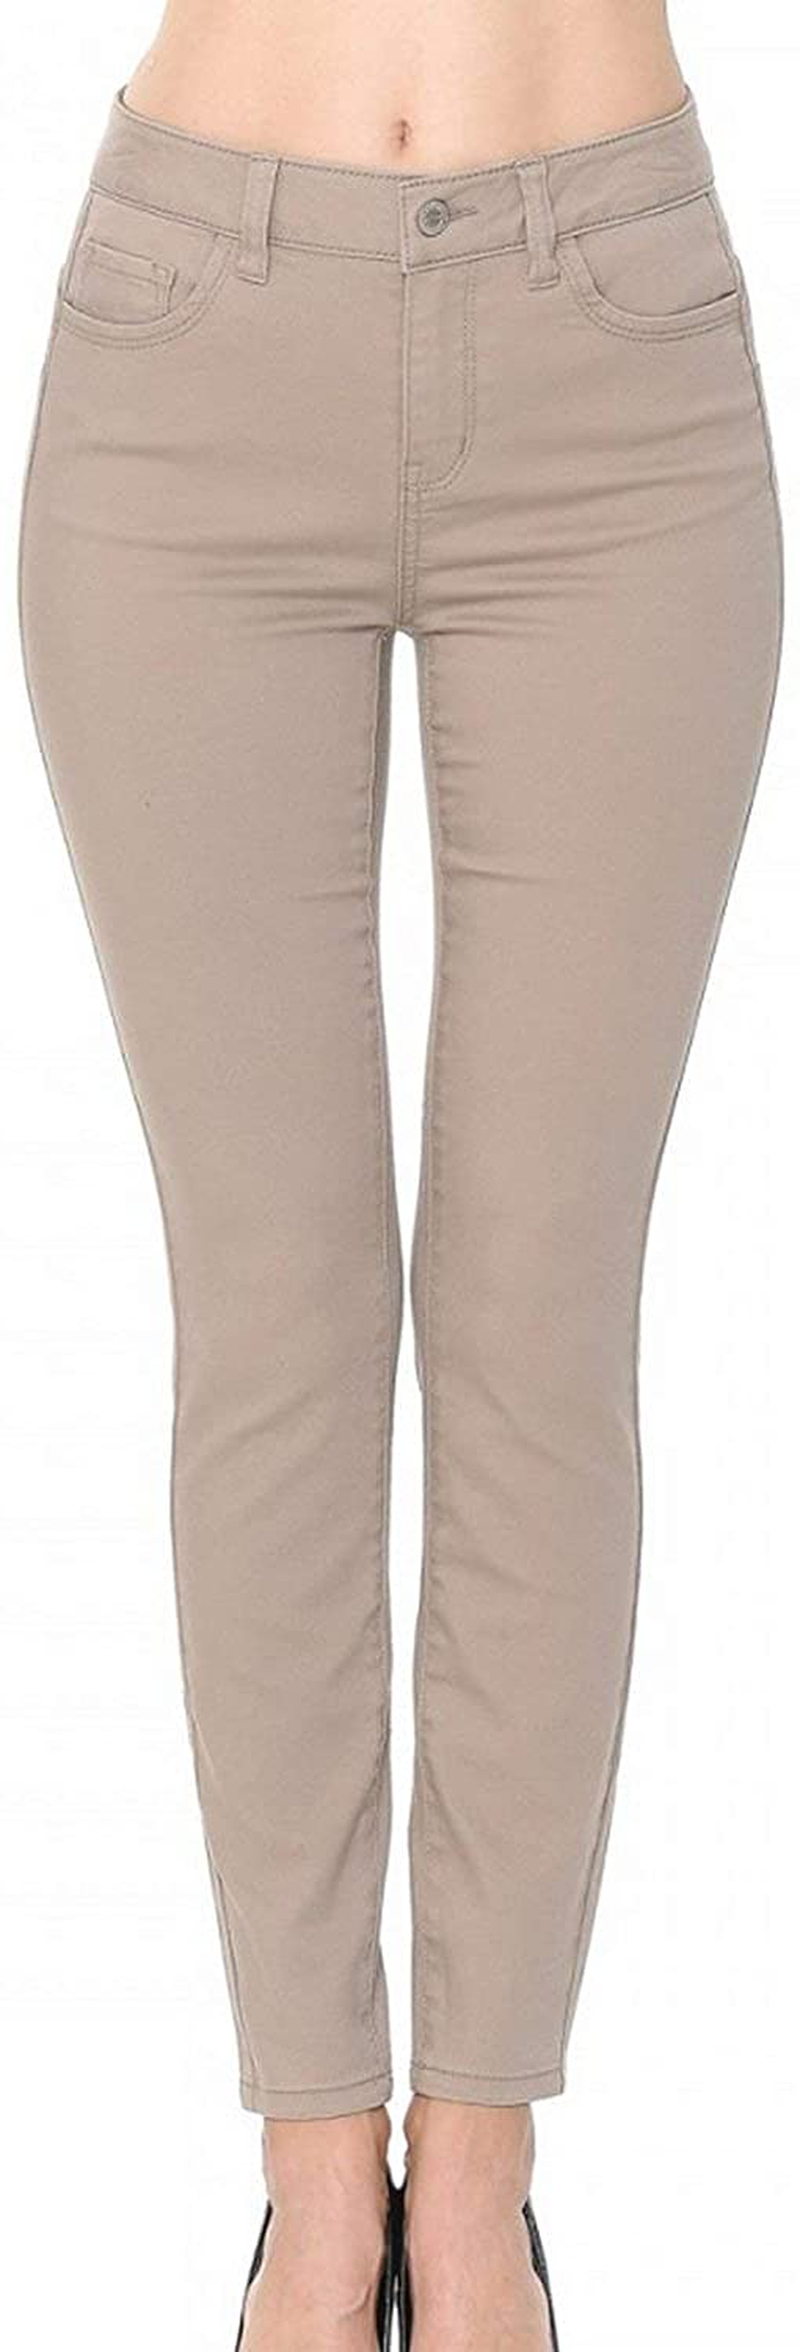 wax jean Push-Up High-Rise Twill Color Pants